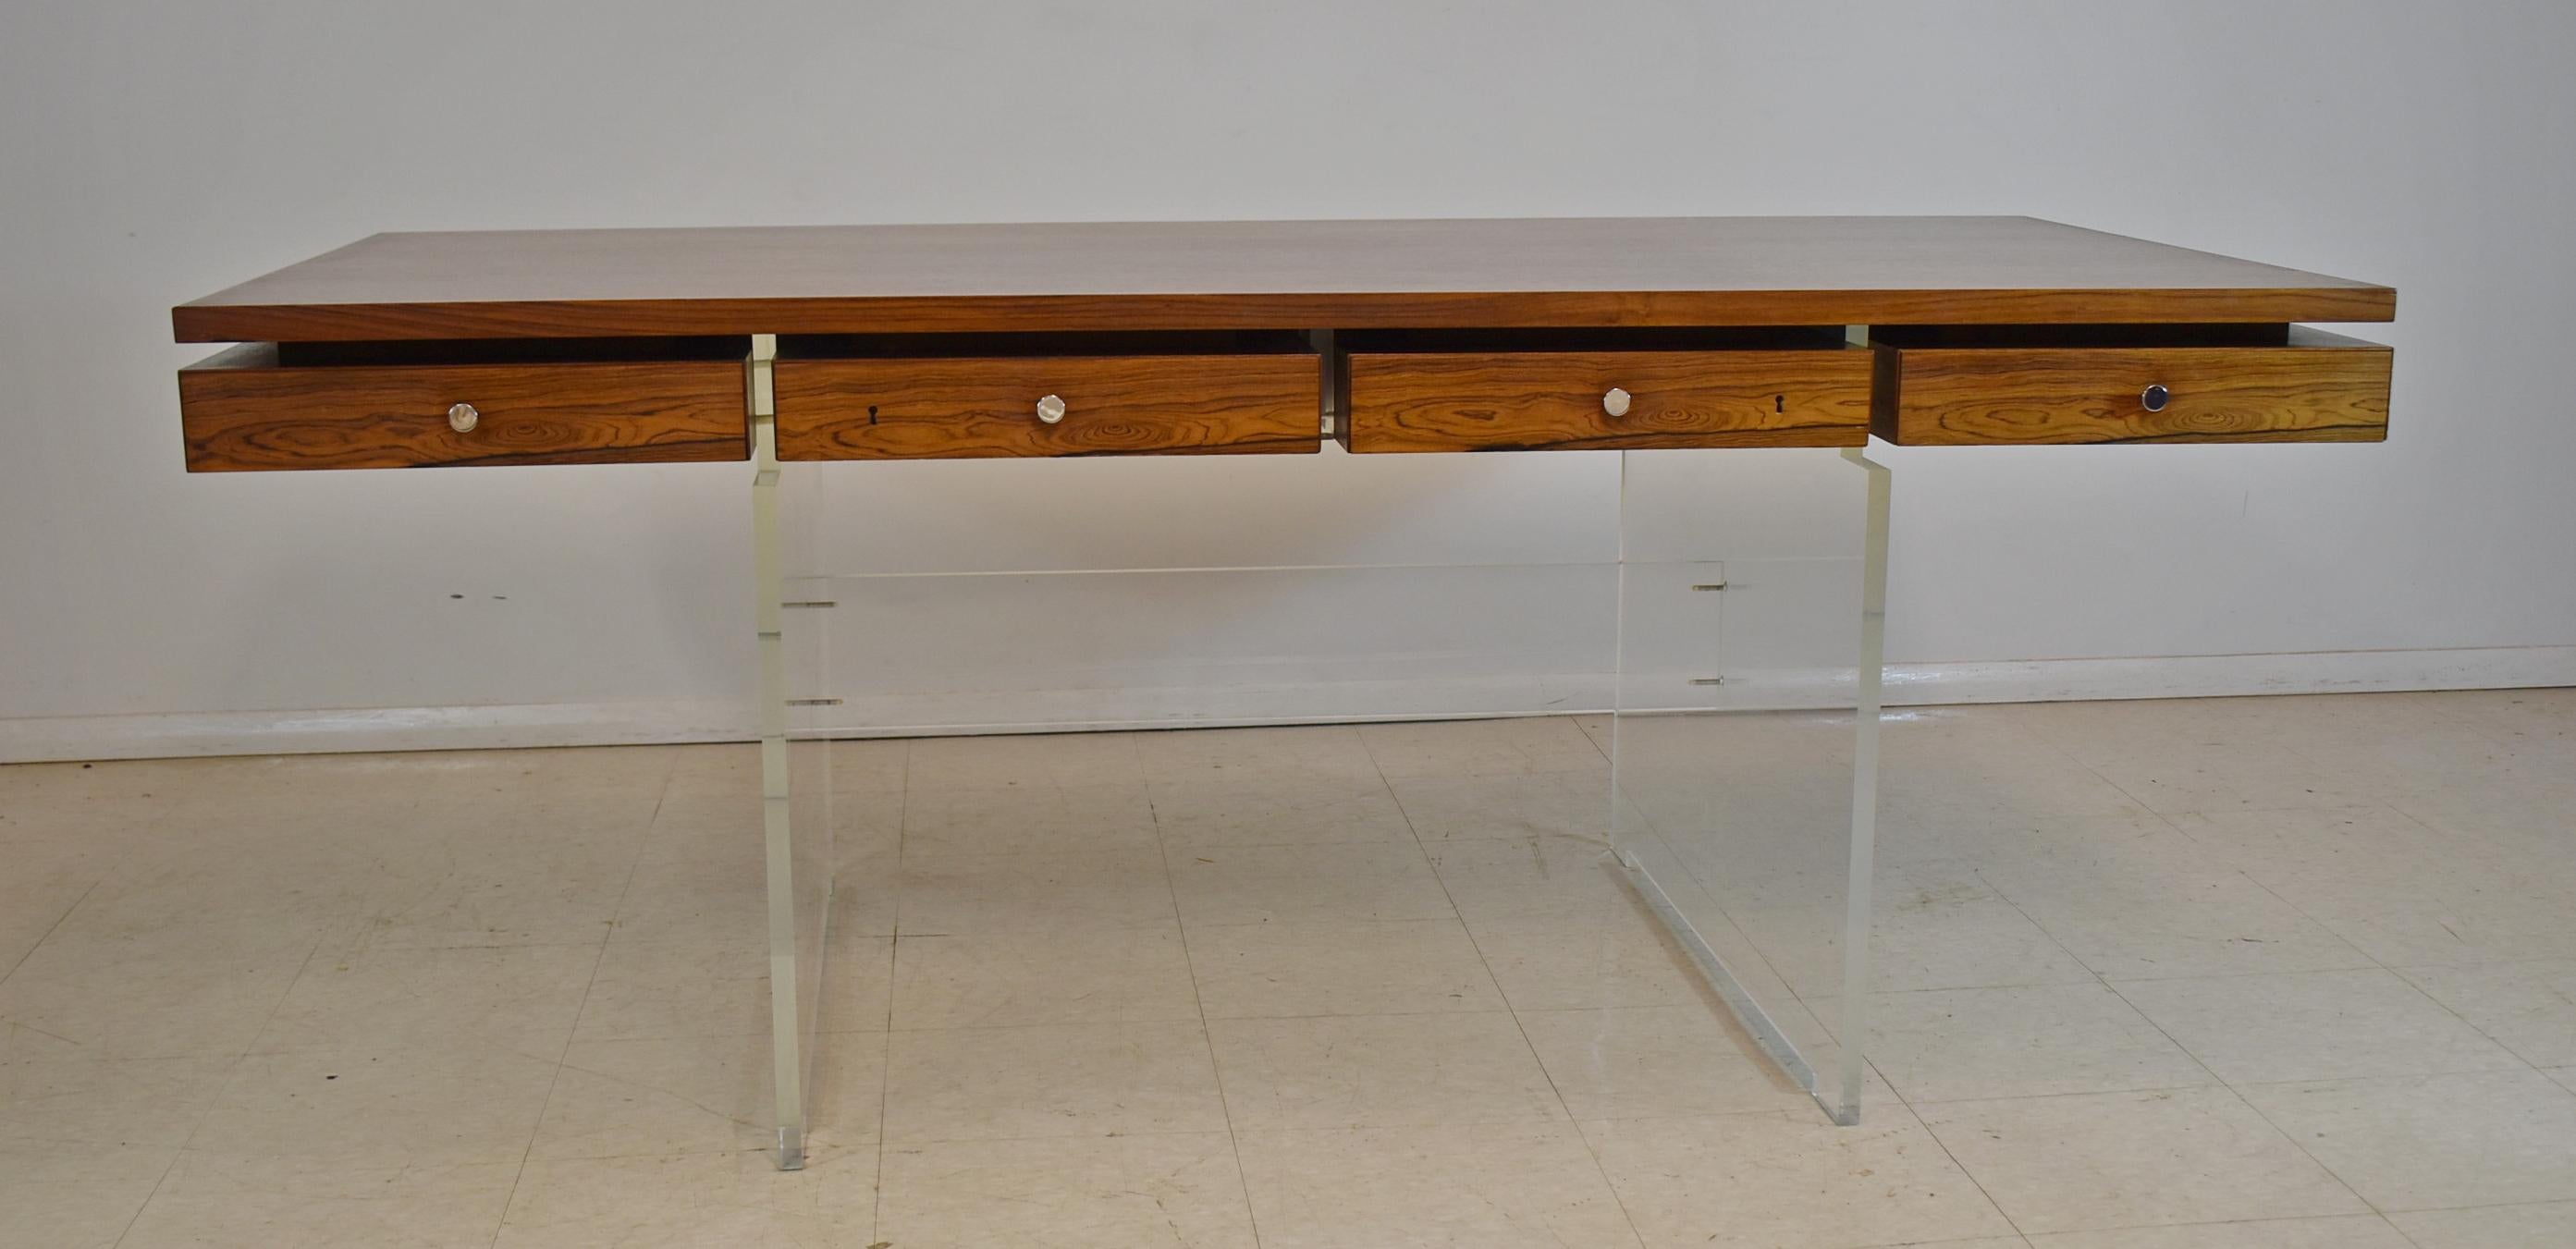 Modern four drawer acrylic and rosewood desk by Poul Norreklit. Acrylic base is 3/4